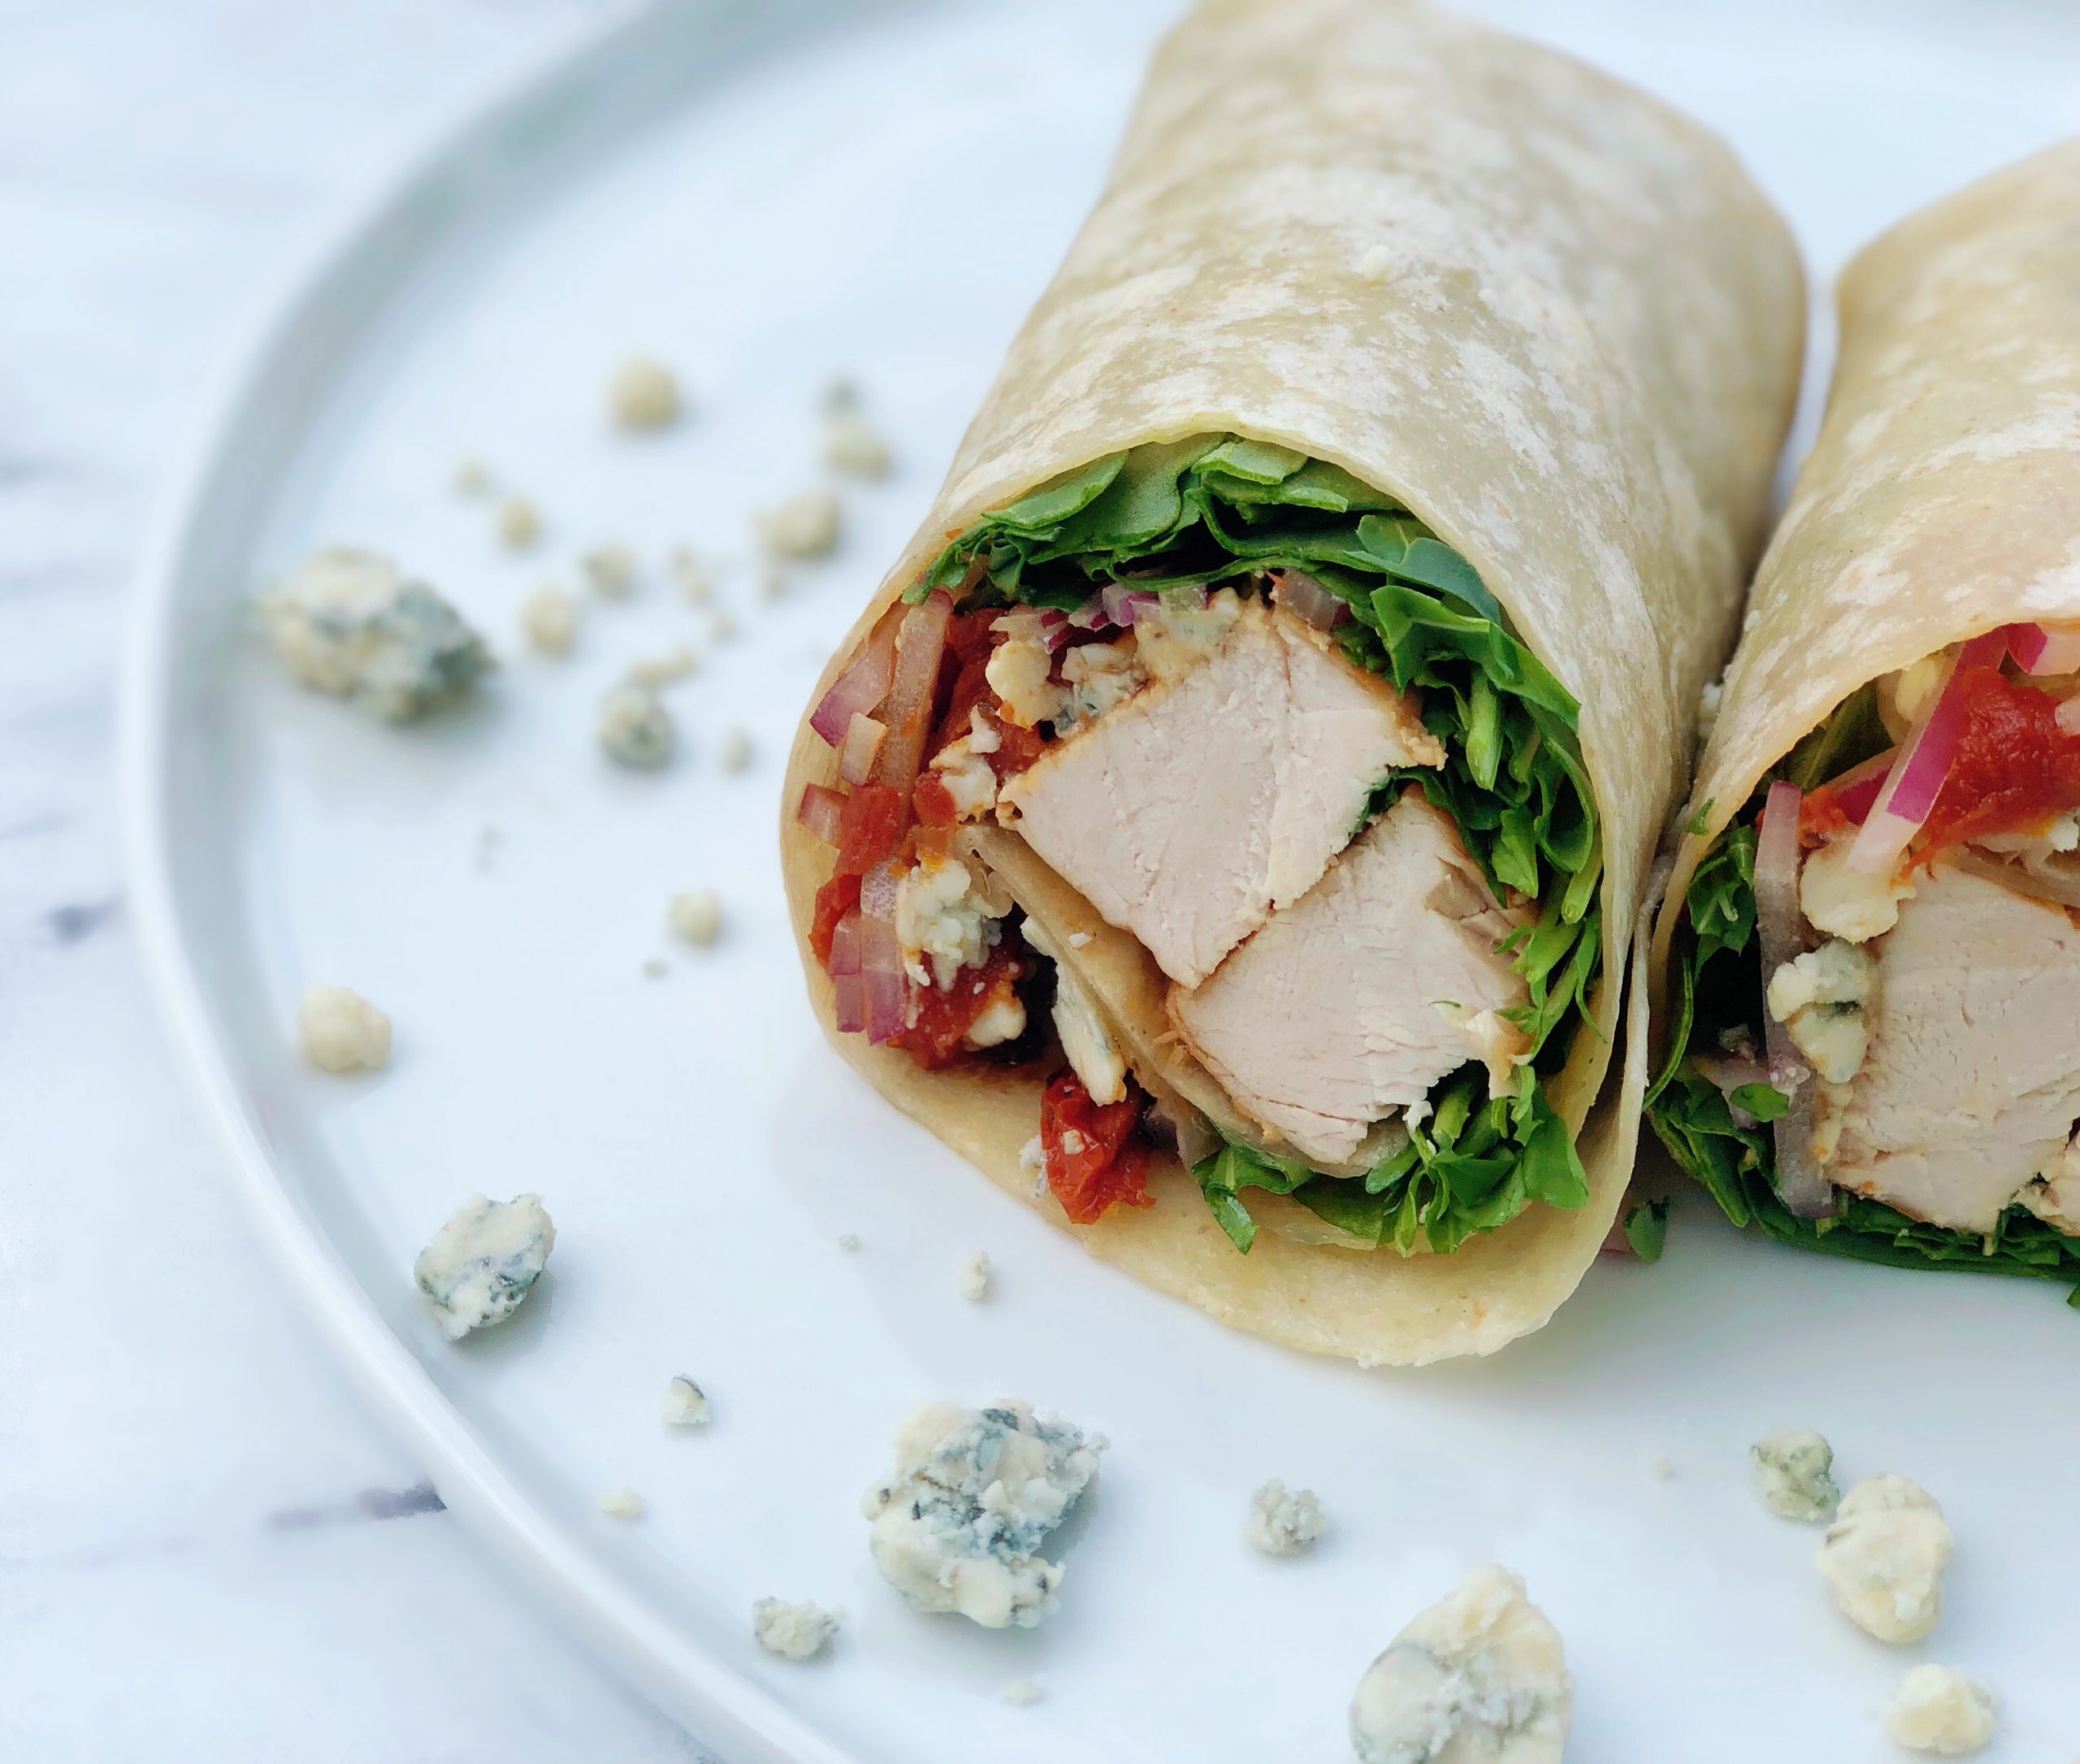 Dish of Balsamic Chicken Wrap with Arugula and Blue Cheese